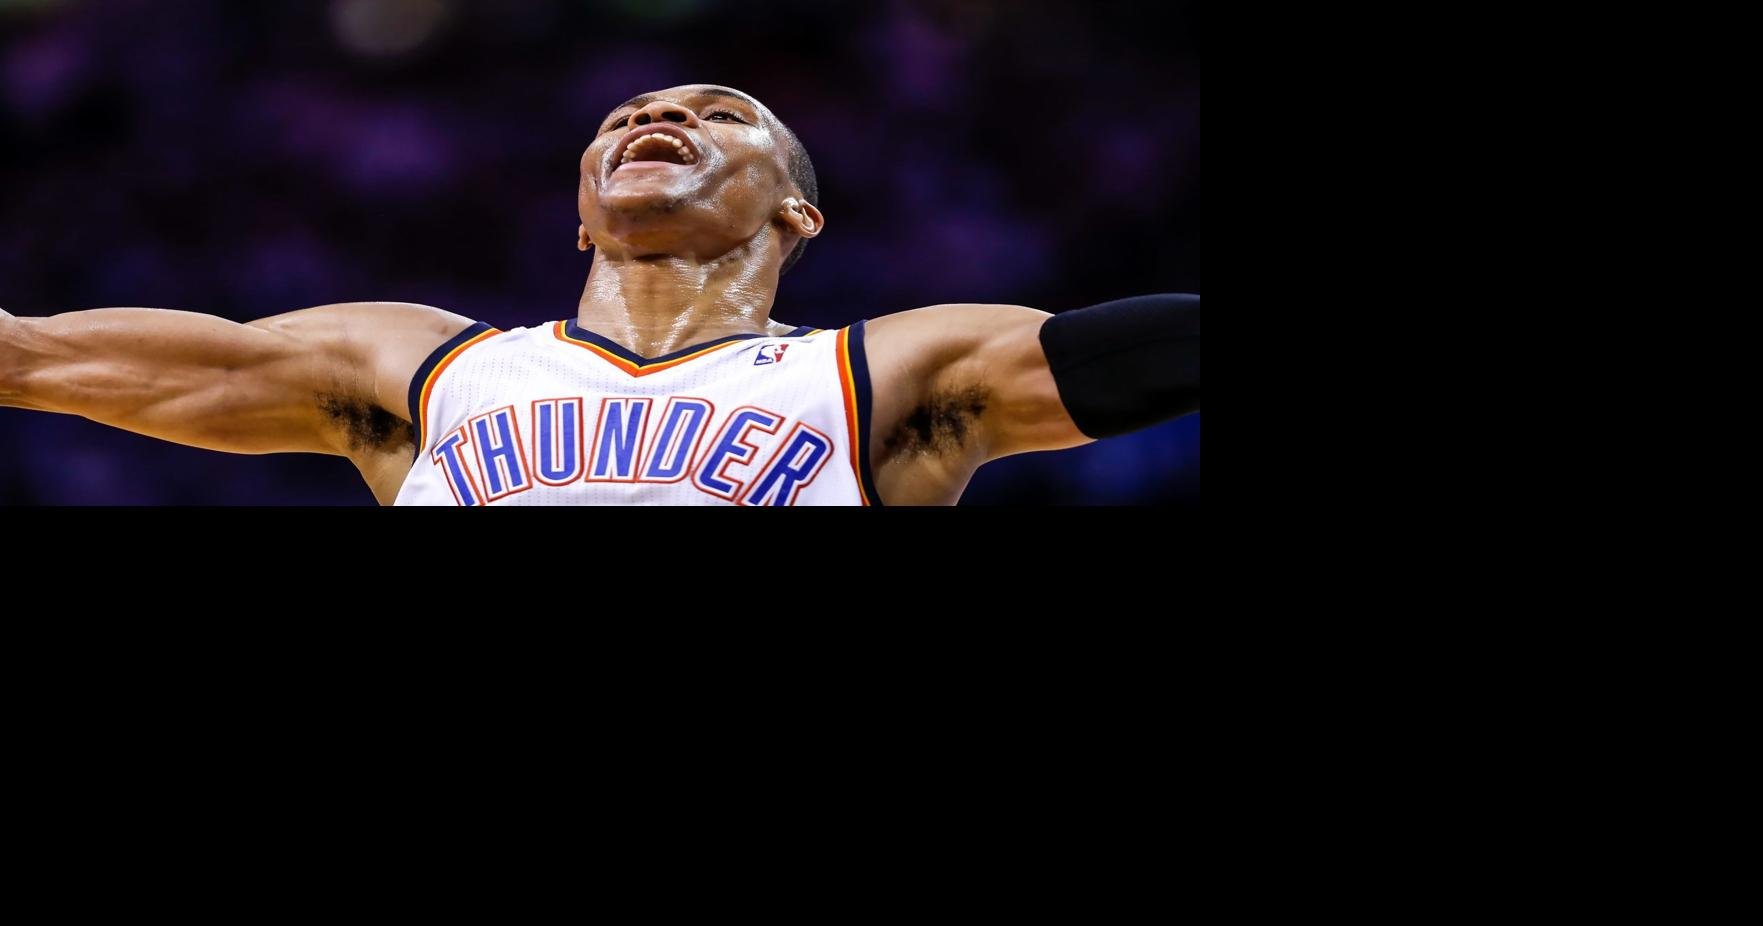 The unique relationship between Russell Westbrook and Hall of